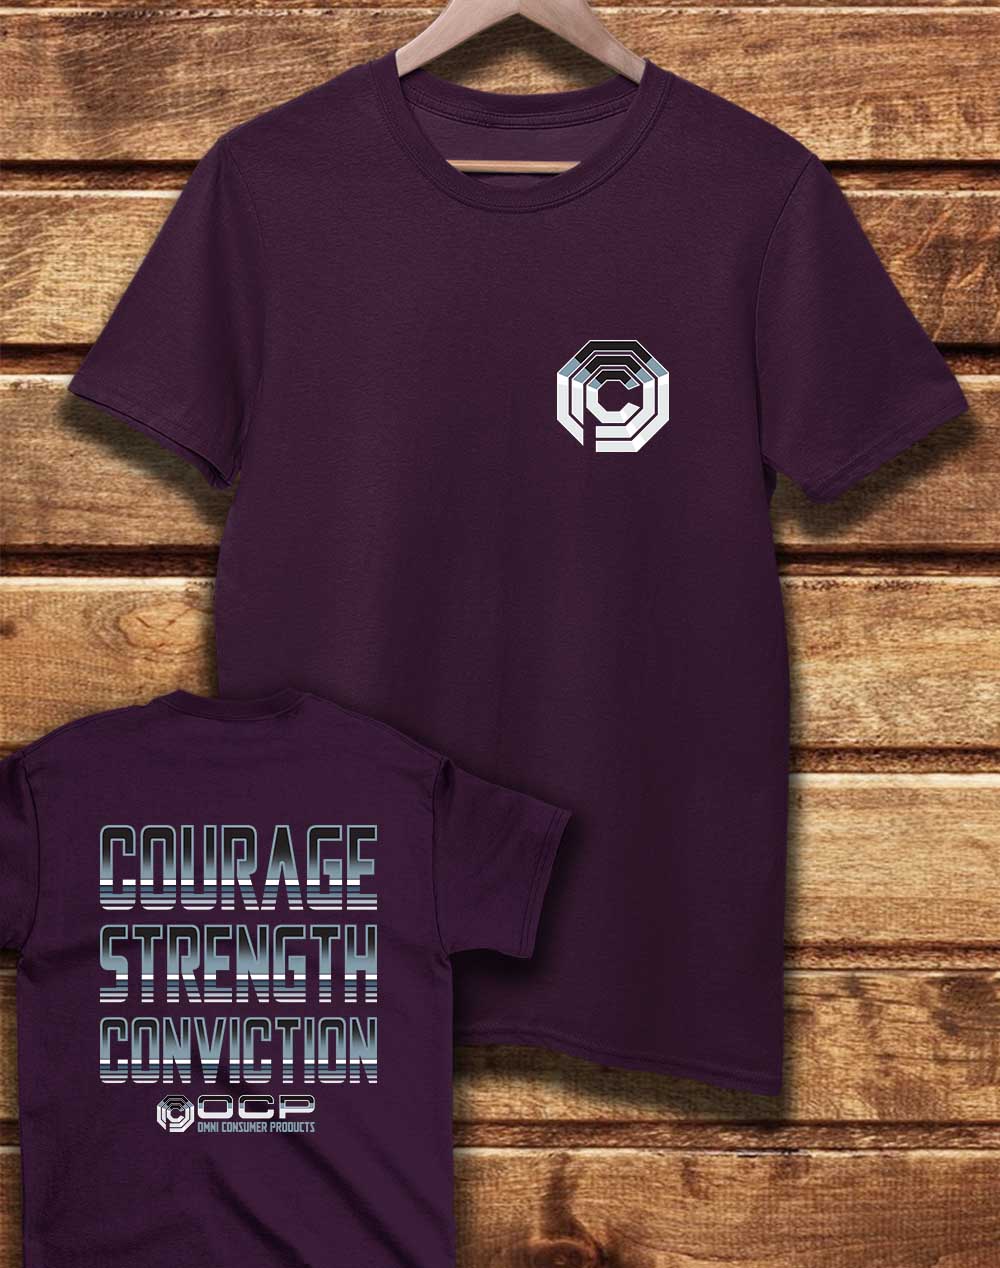 Eggplant - DELUXE OCP Courage Strength Conviction with Back Print Organic Cotton T-Shirt